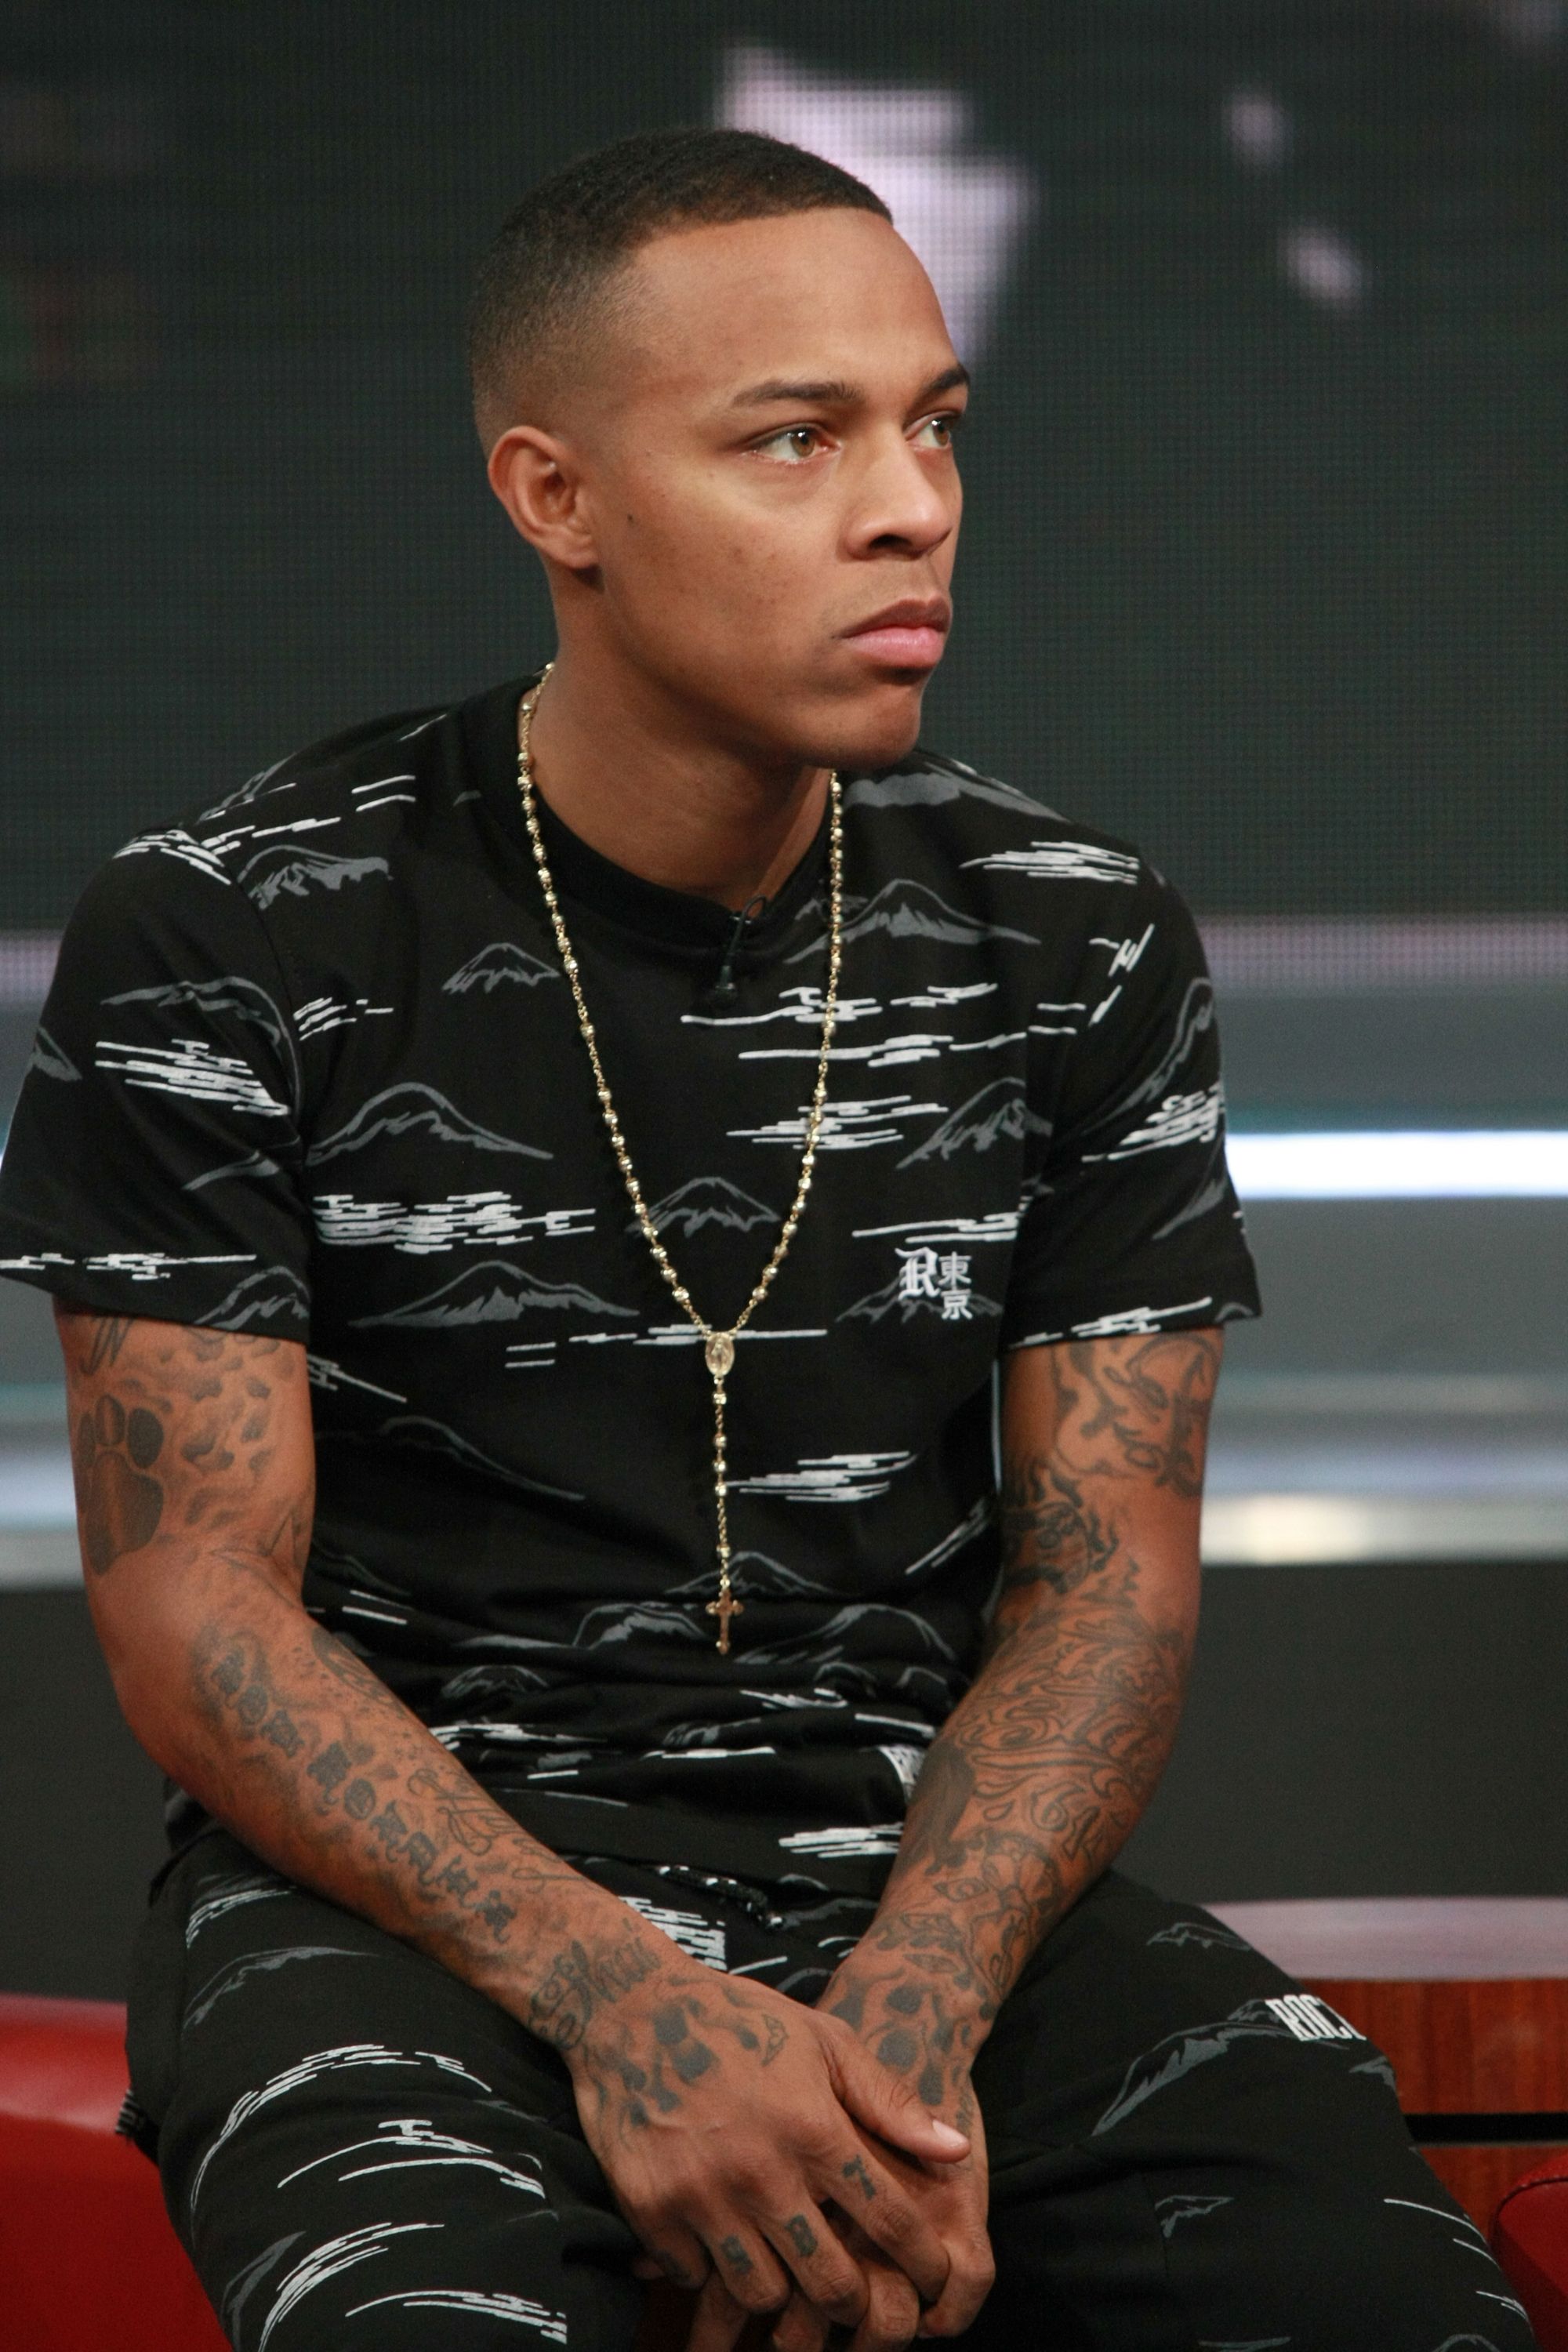 Shad Moss or “Bow Wow” at BET studio on October 27, 2014 in New York. │Photo: Getty Images